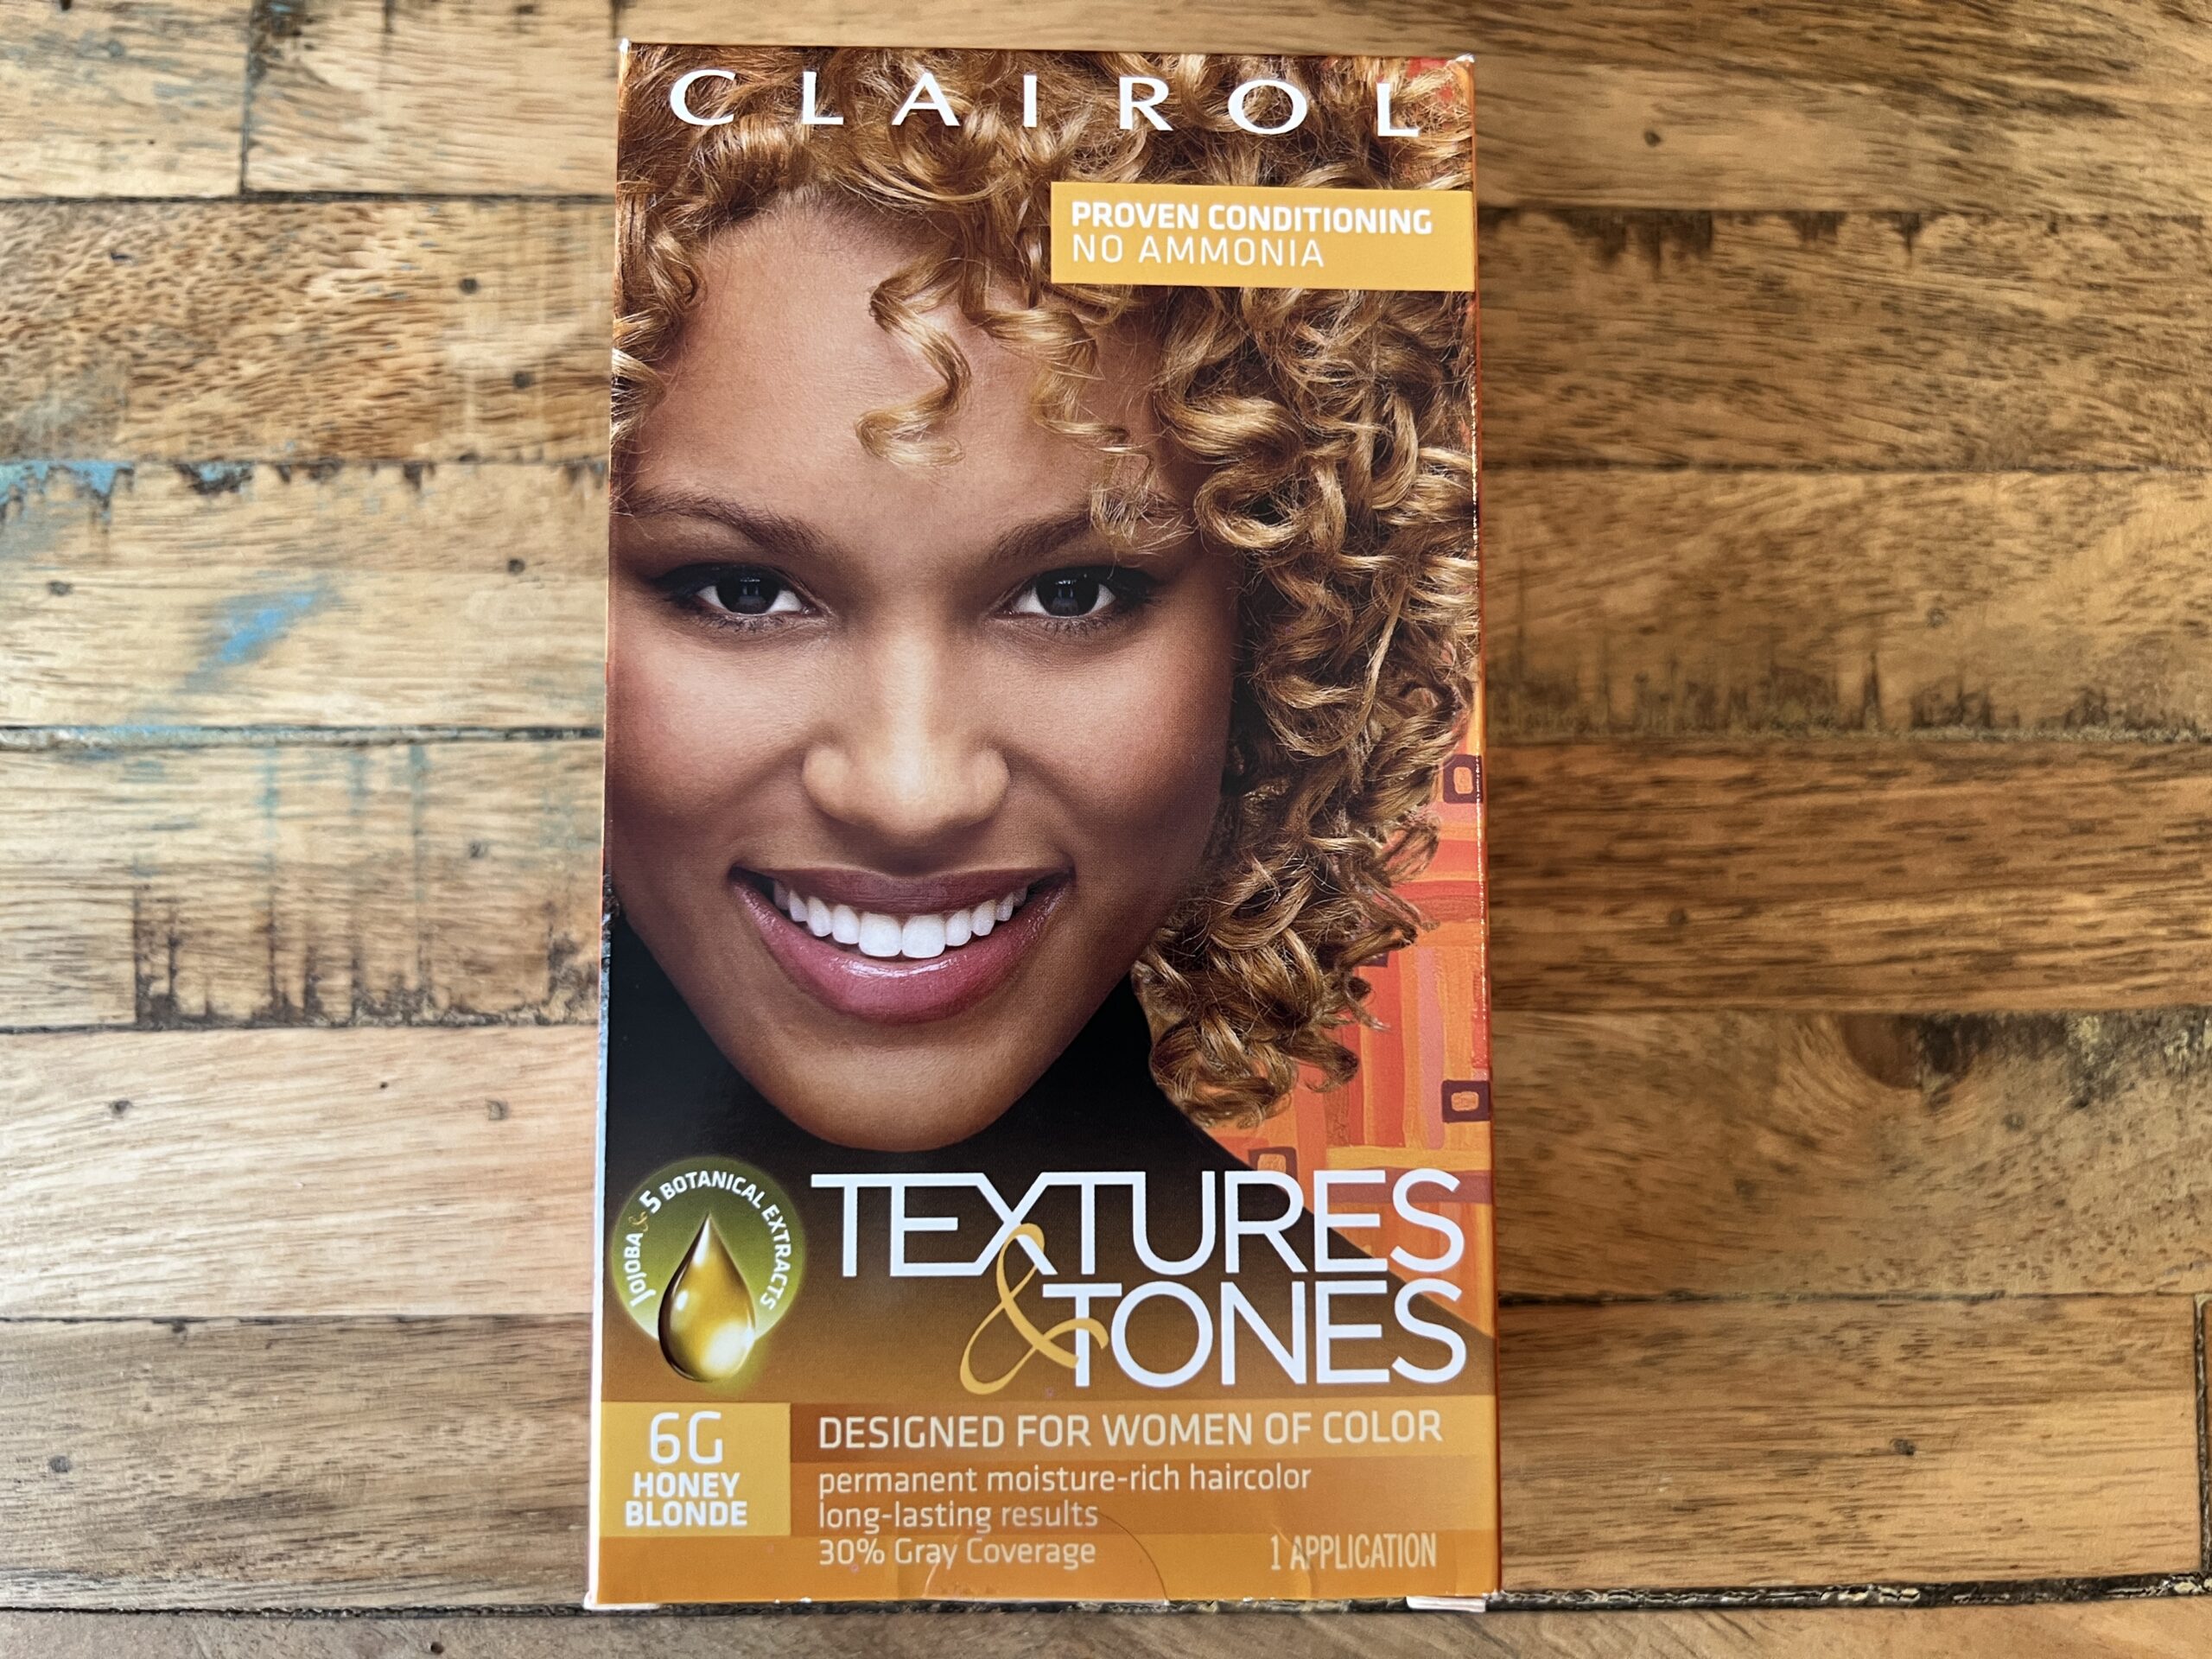 This box of 6G Honey Blonde Clairol Textures and Tones proven conditioning hair dye doesn't contain ammonia, and it's designed for women of color.